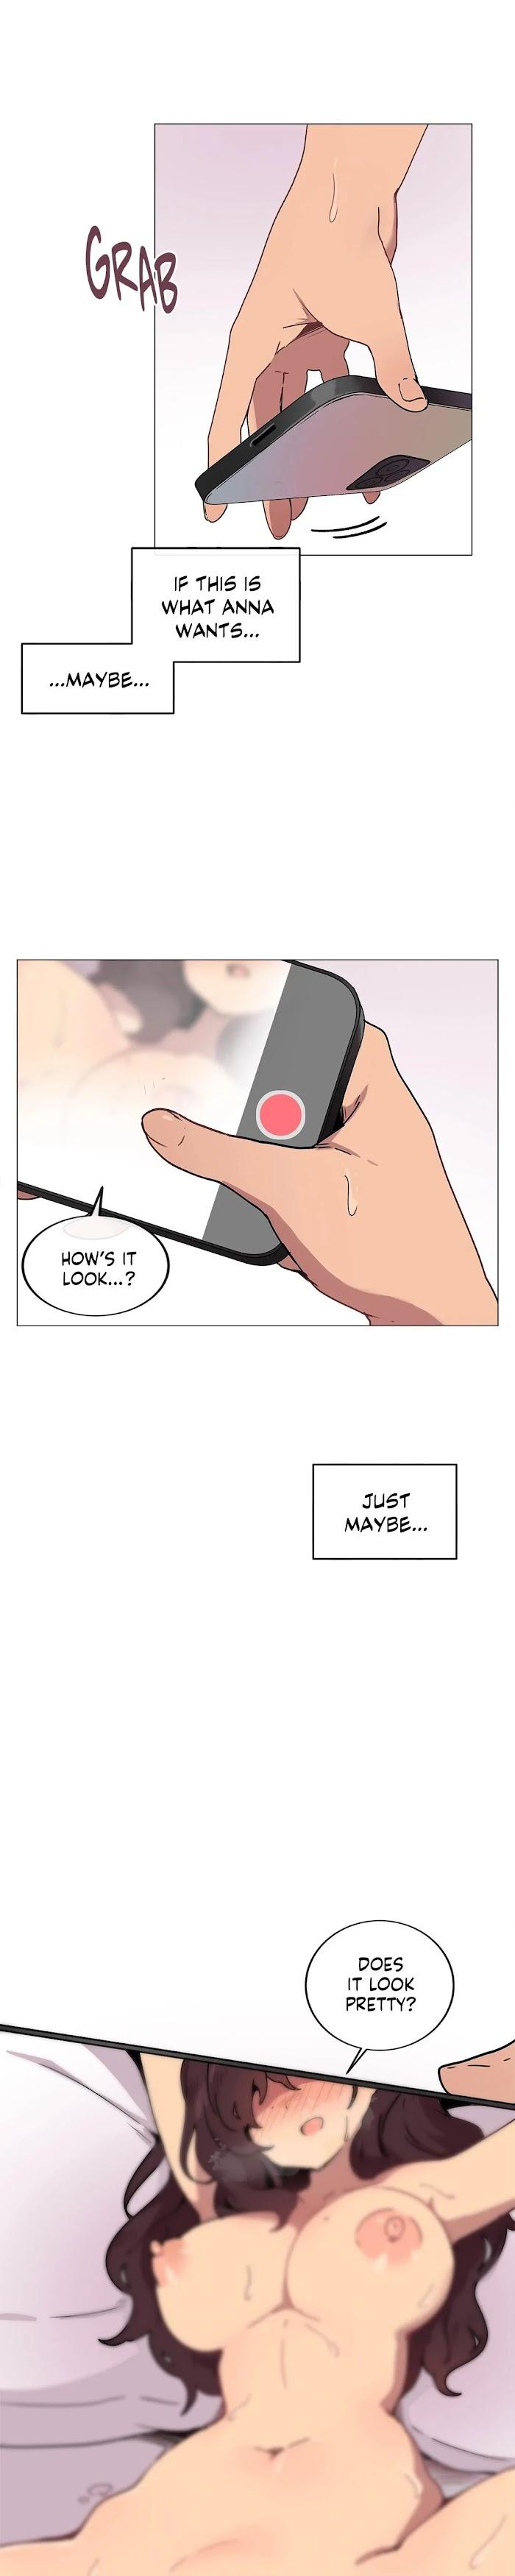 [Dumangoon, 130F] Sexcape Room: Wipe Out Ch.9/9 [English] [Manhwa PDF] Completed 179